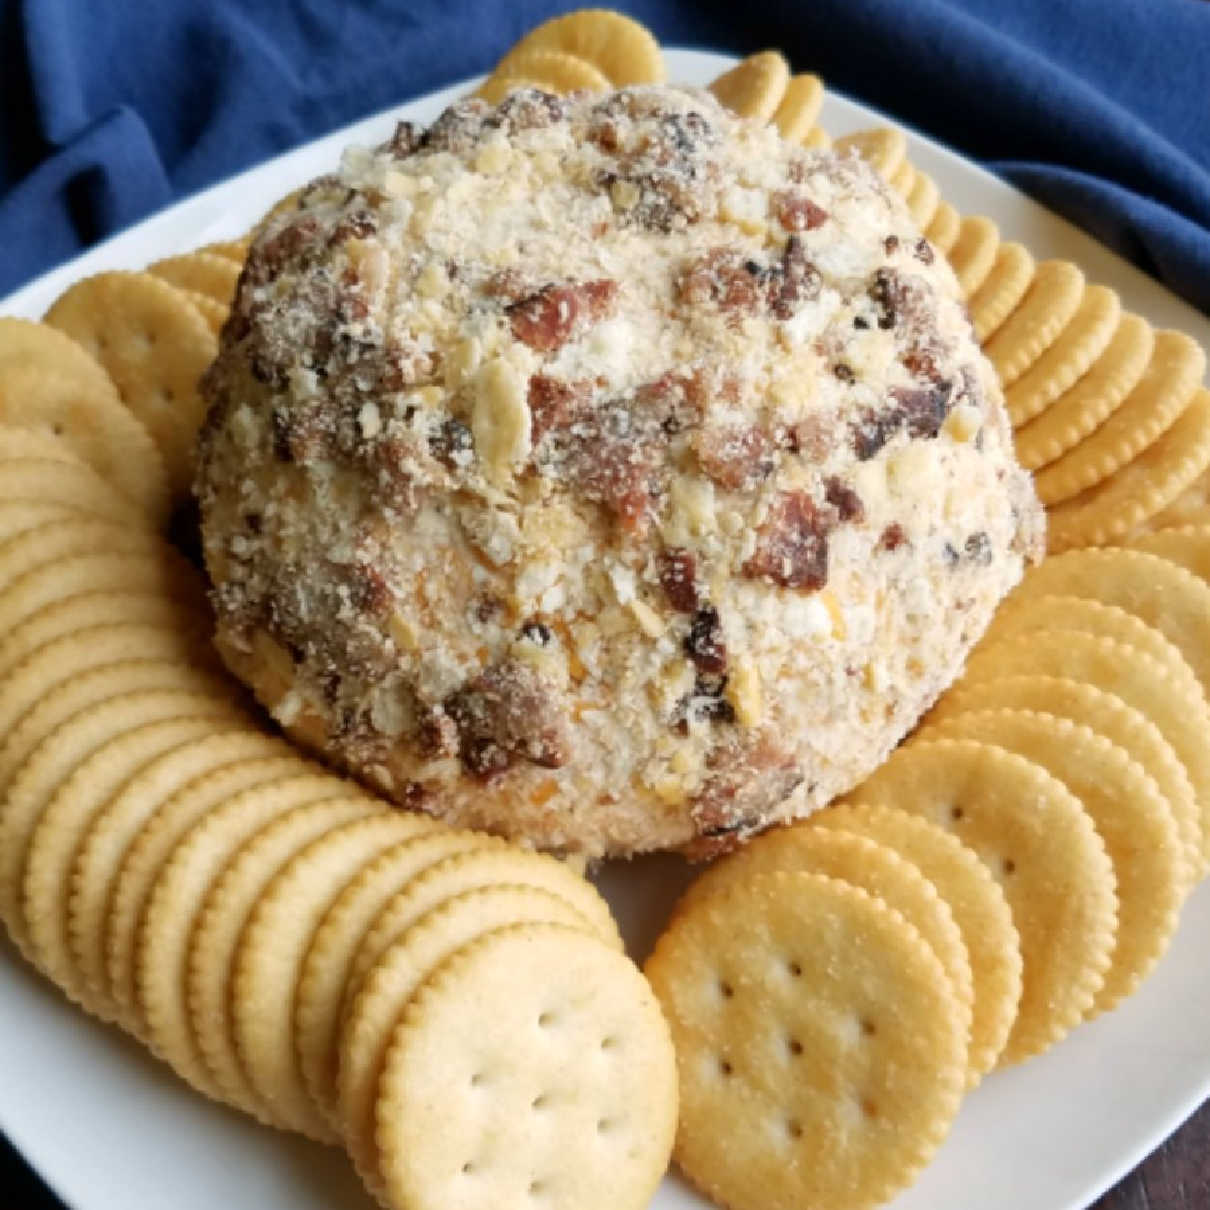 Cheddar bacon ranch cheese ball coated in cracker crumbs and bacon pieces surrounded by butter crackers on plate, ready to serve.